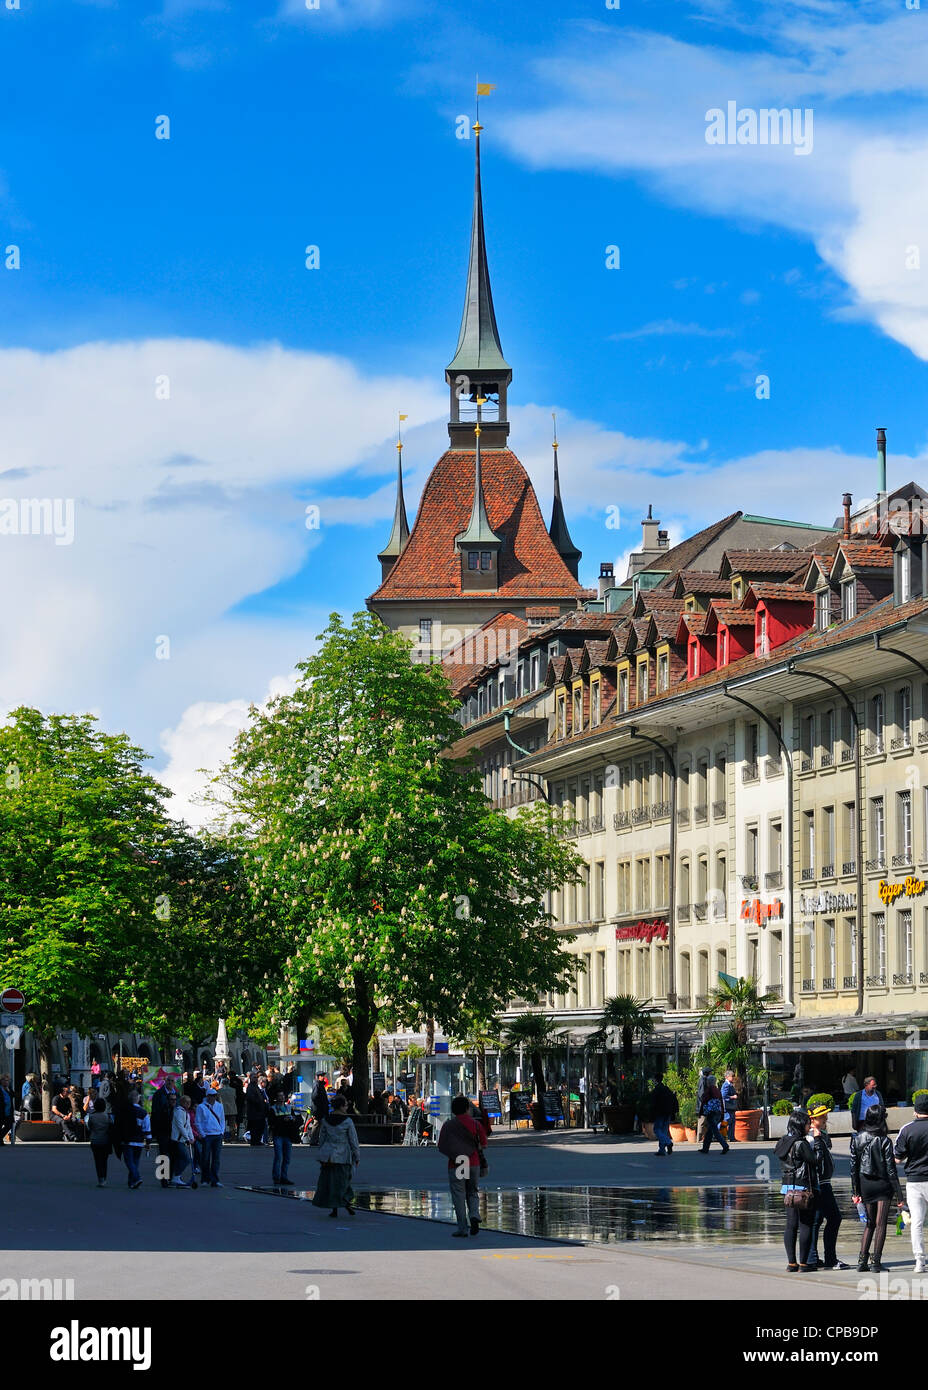 The south side of the Baerenplatz (Bear Plaza) near the capitol building in the city of Bern, Switzerland. Stock Photo